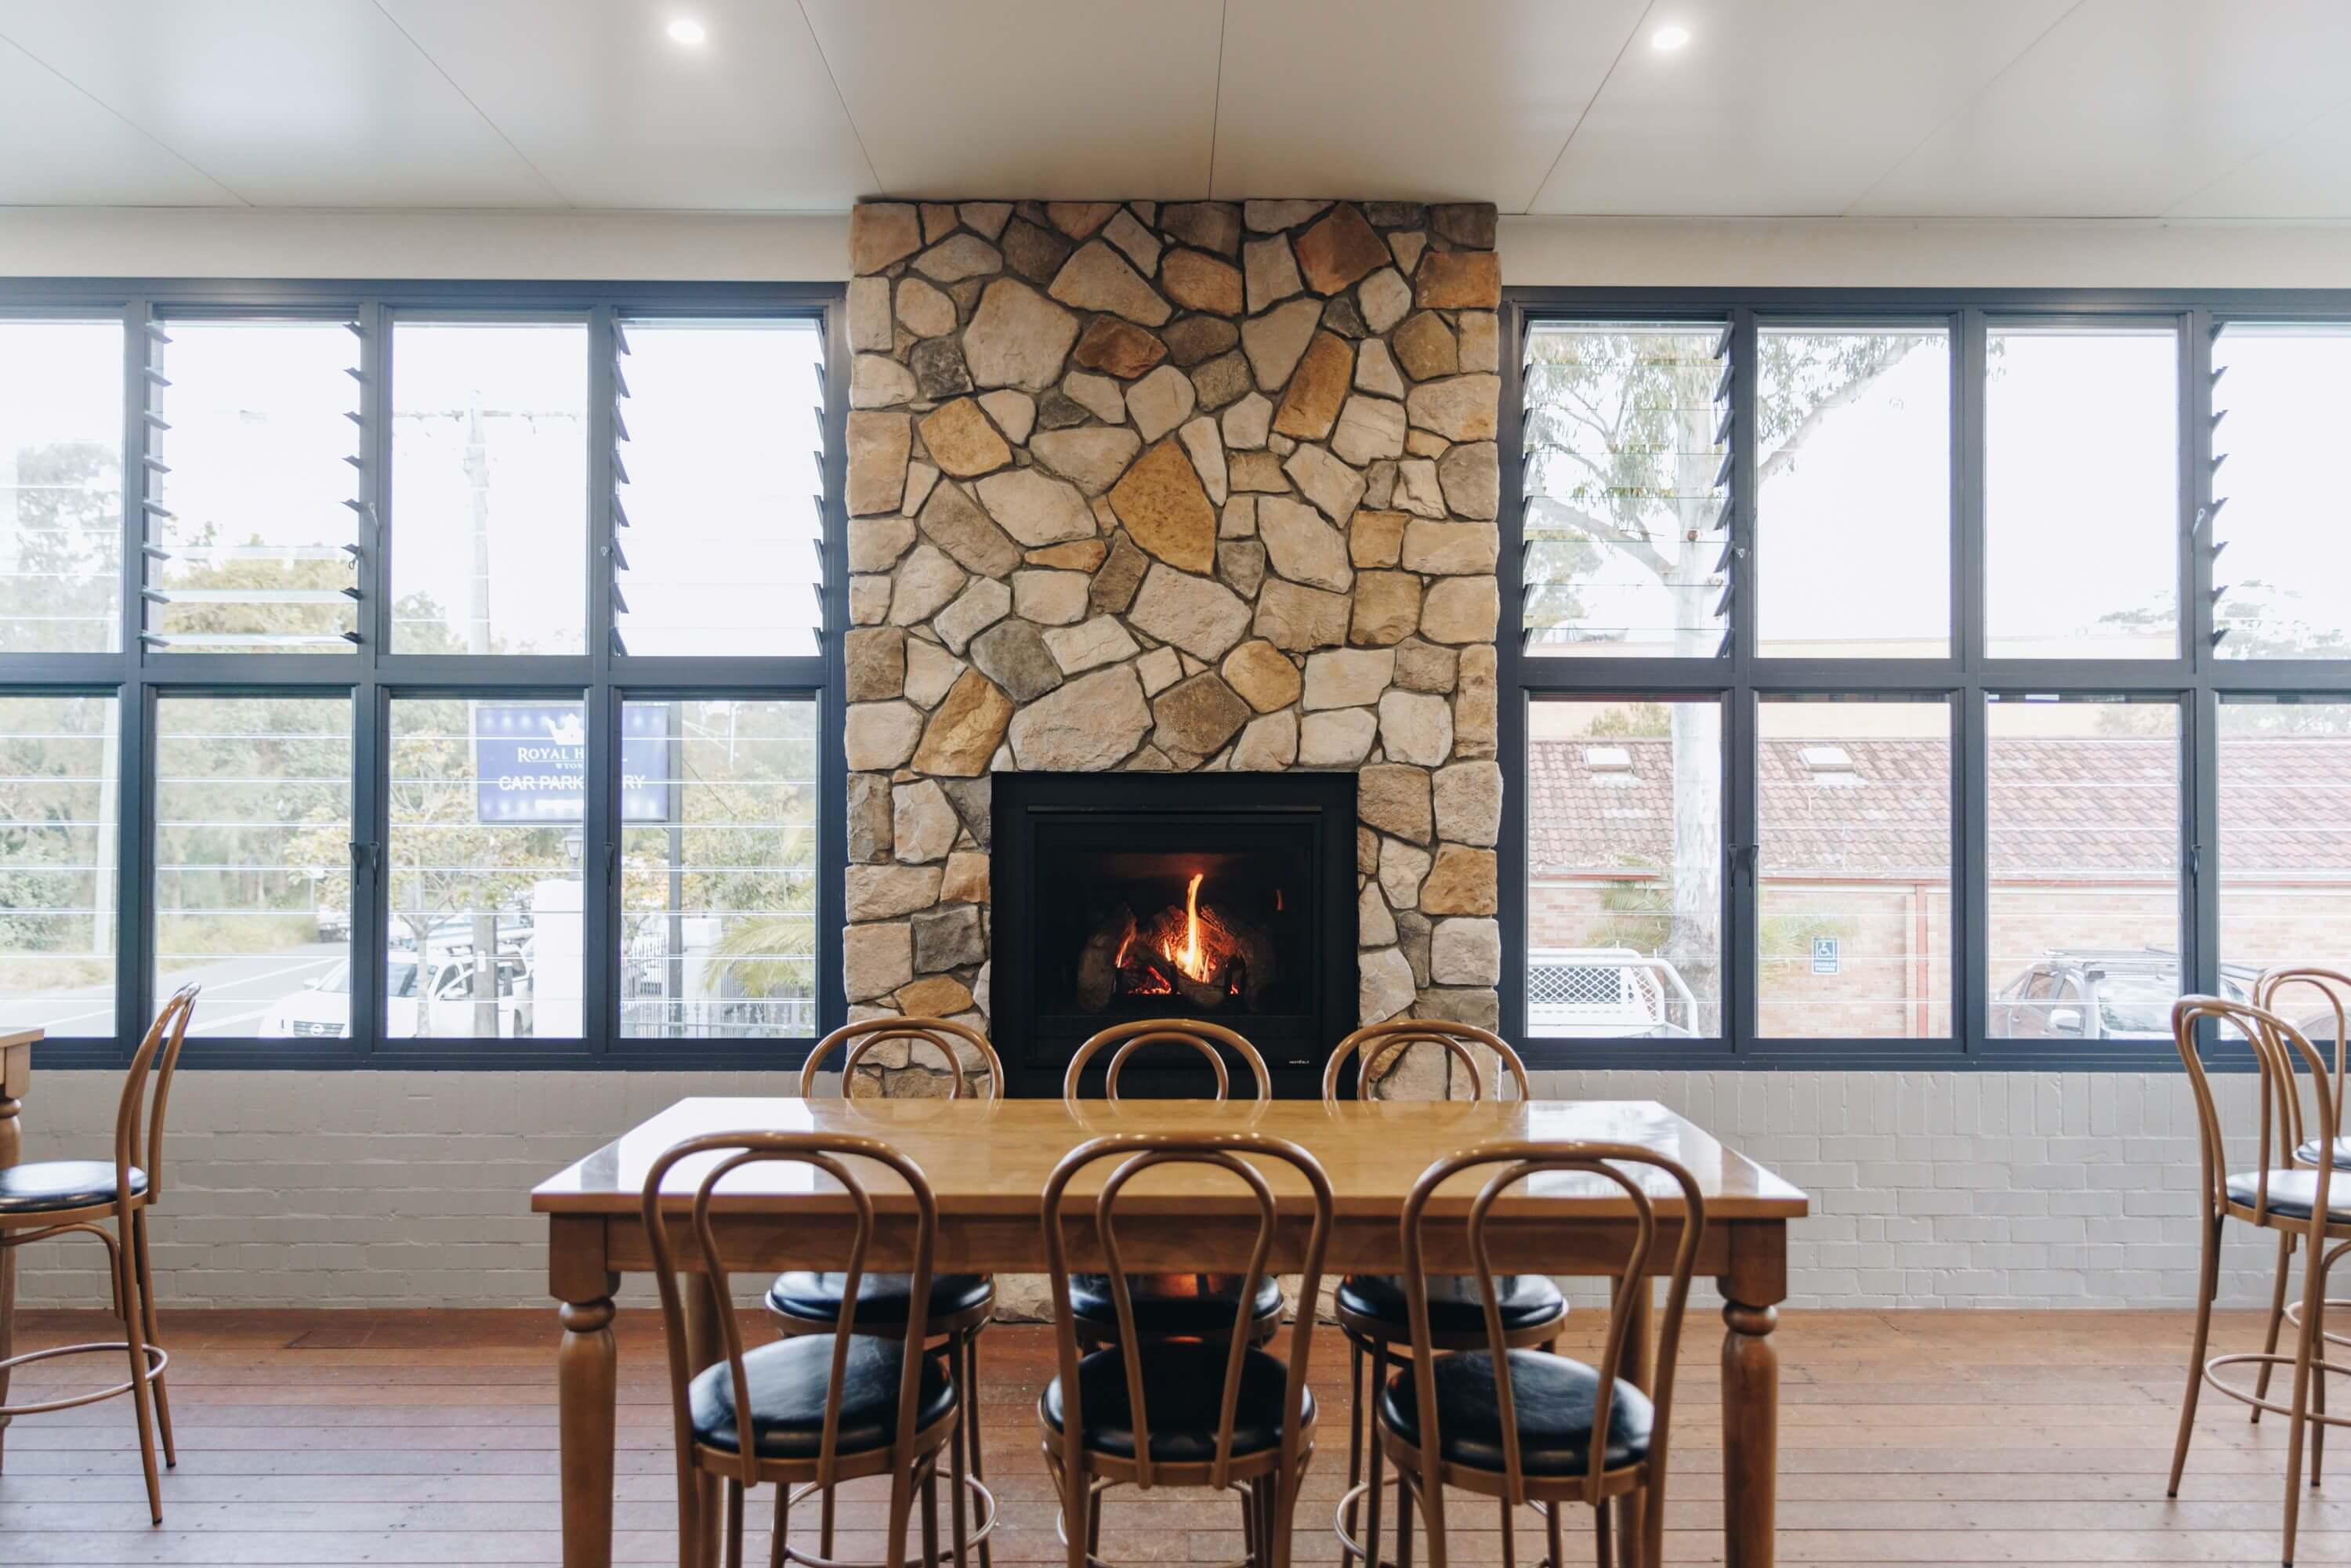 royal hotel wyong refurb decor with fireplace